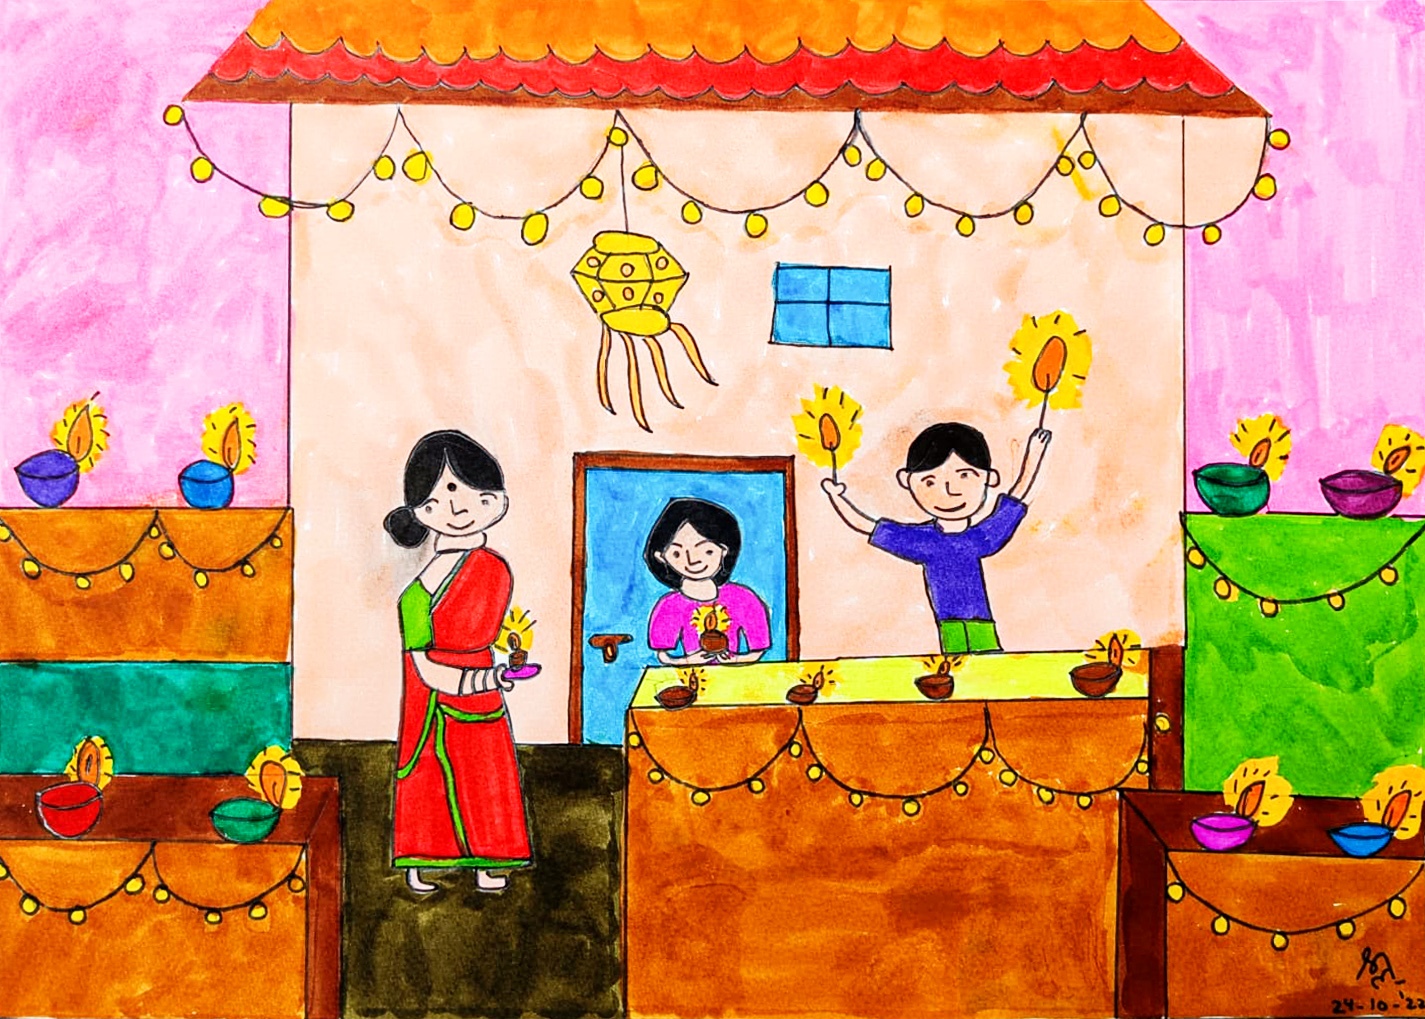 Diwali drawing for kids | How to draw safe diwali festival | Cute girl d...  | Diwali drawing, Diwali festival drawing, Drawing for kids